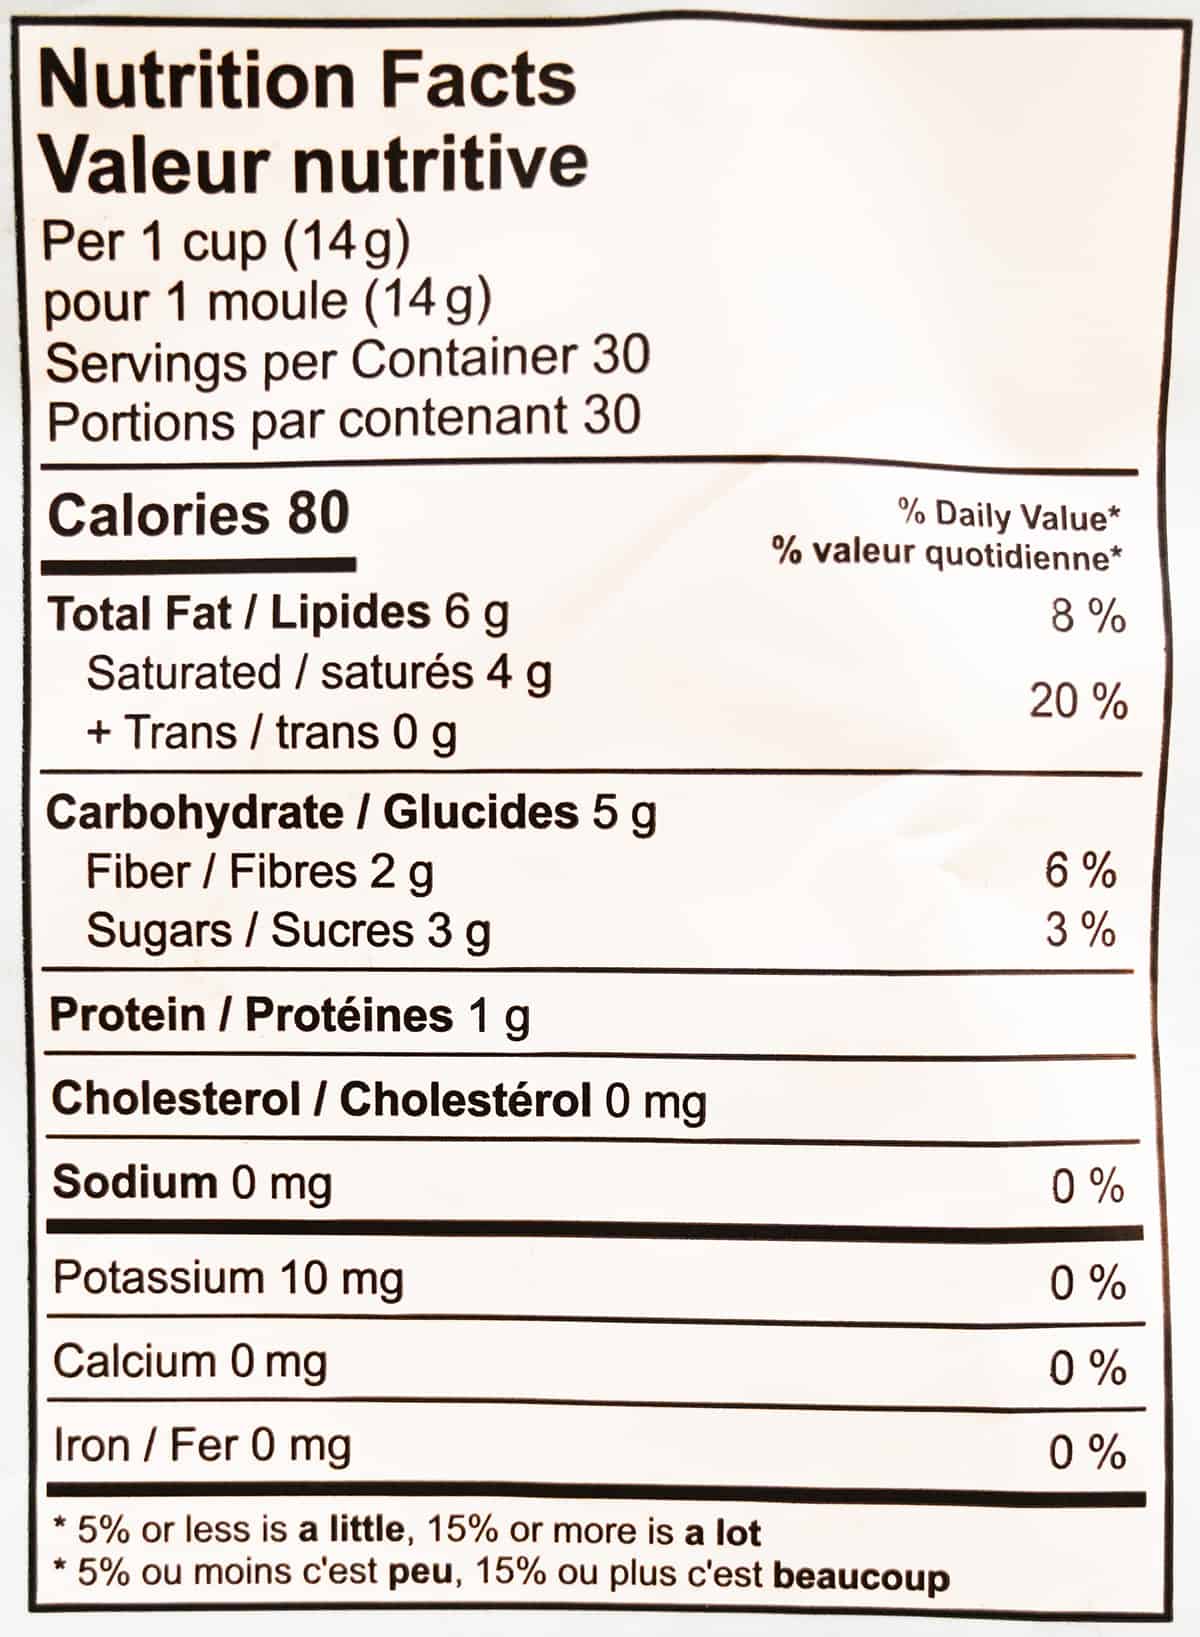 Image of the nutrition facts for the coconut cups from the back of the bag.